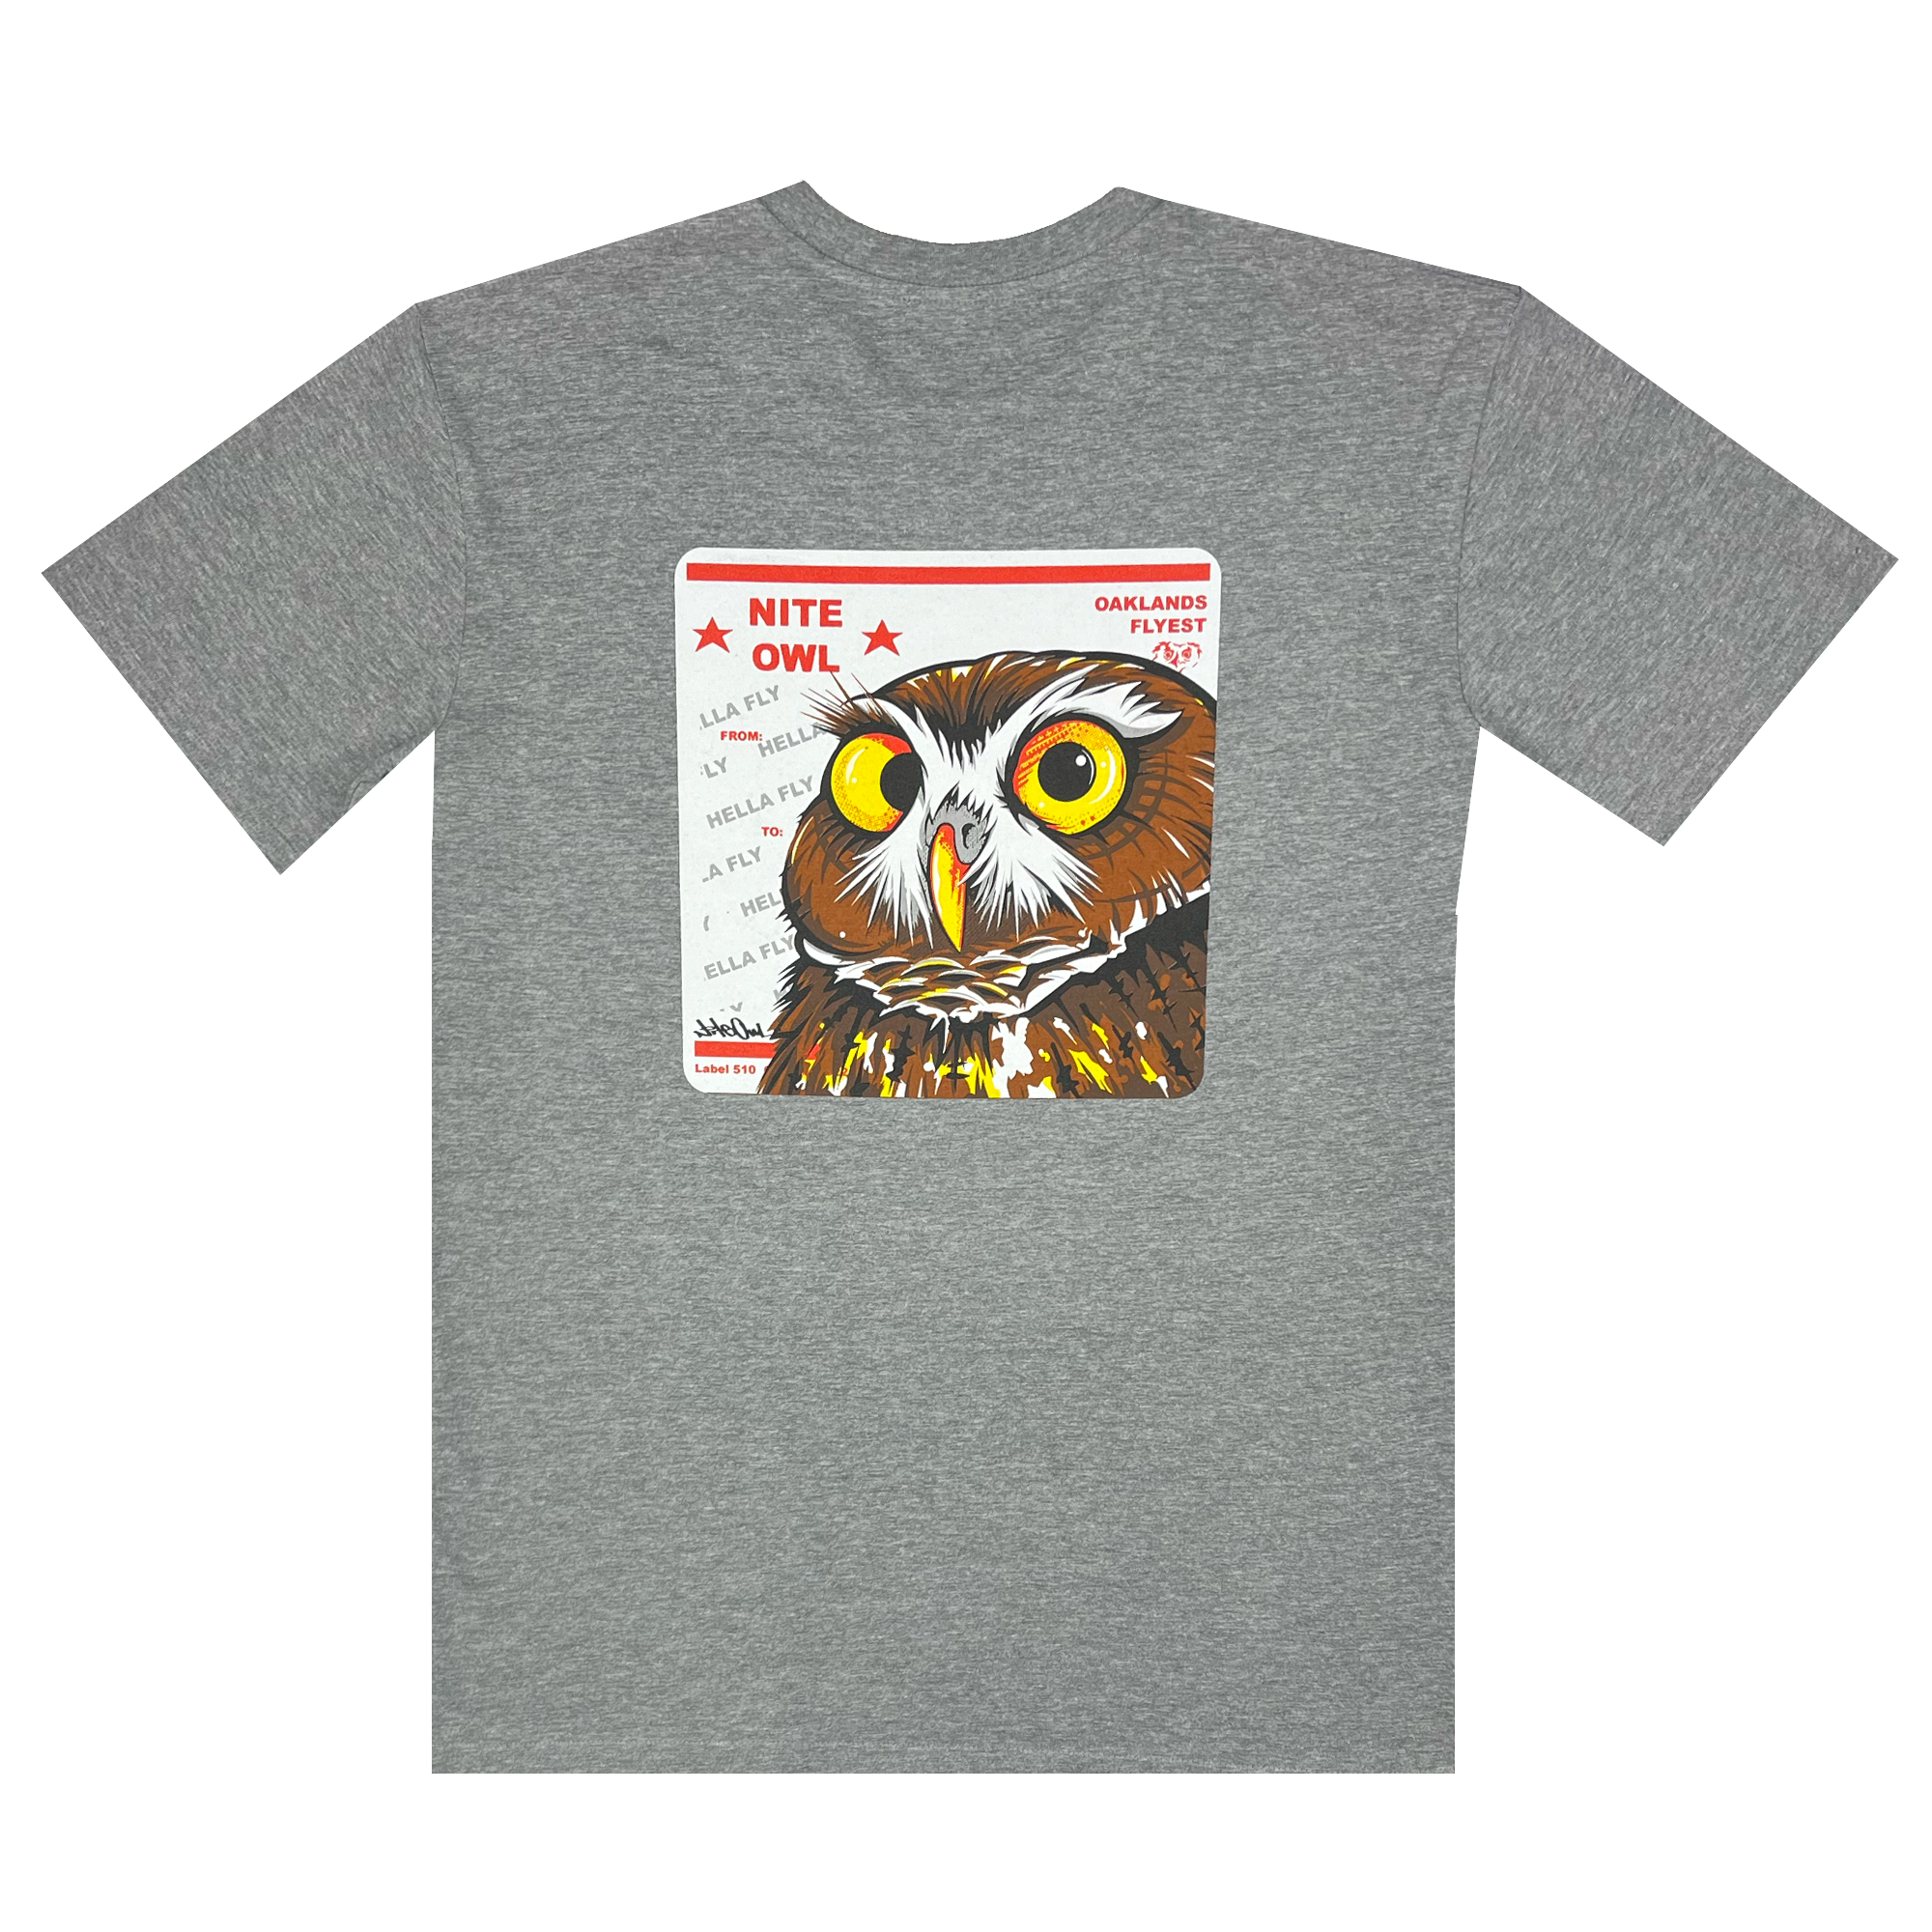 Backside view of a grey t-shirt featuring a graphic with a Burrowing Owl designed by Oakland Artist Nite Owl on a USPS sticker.